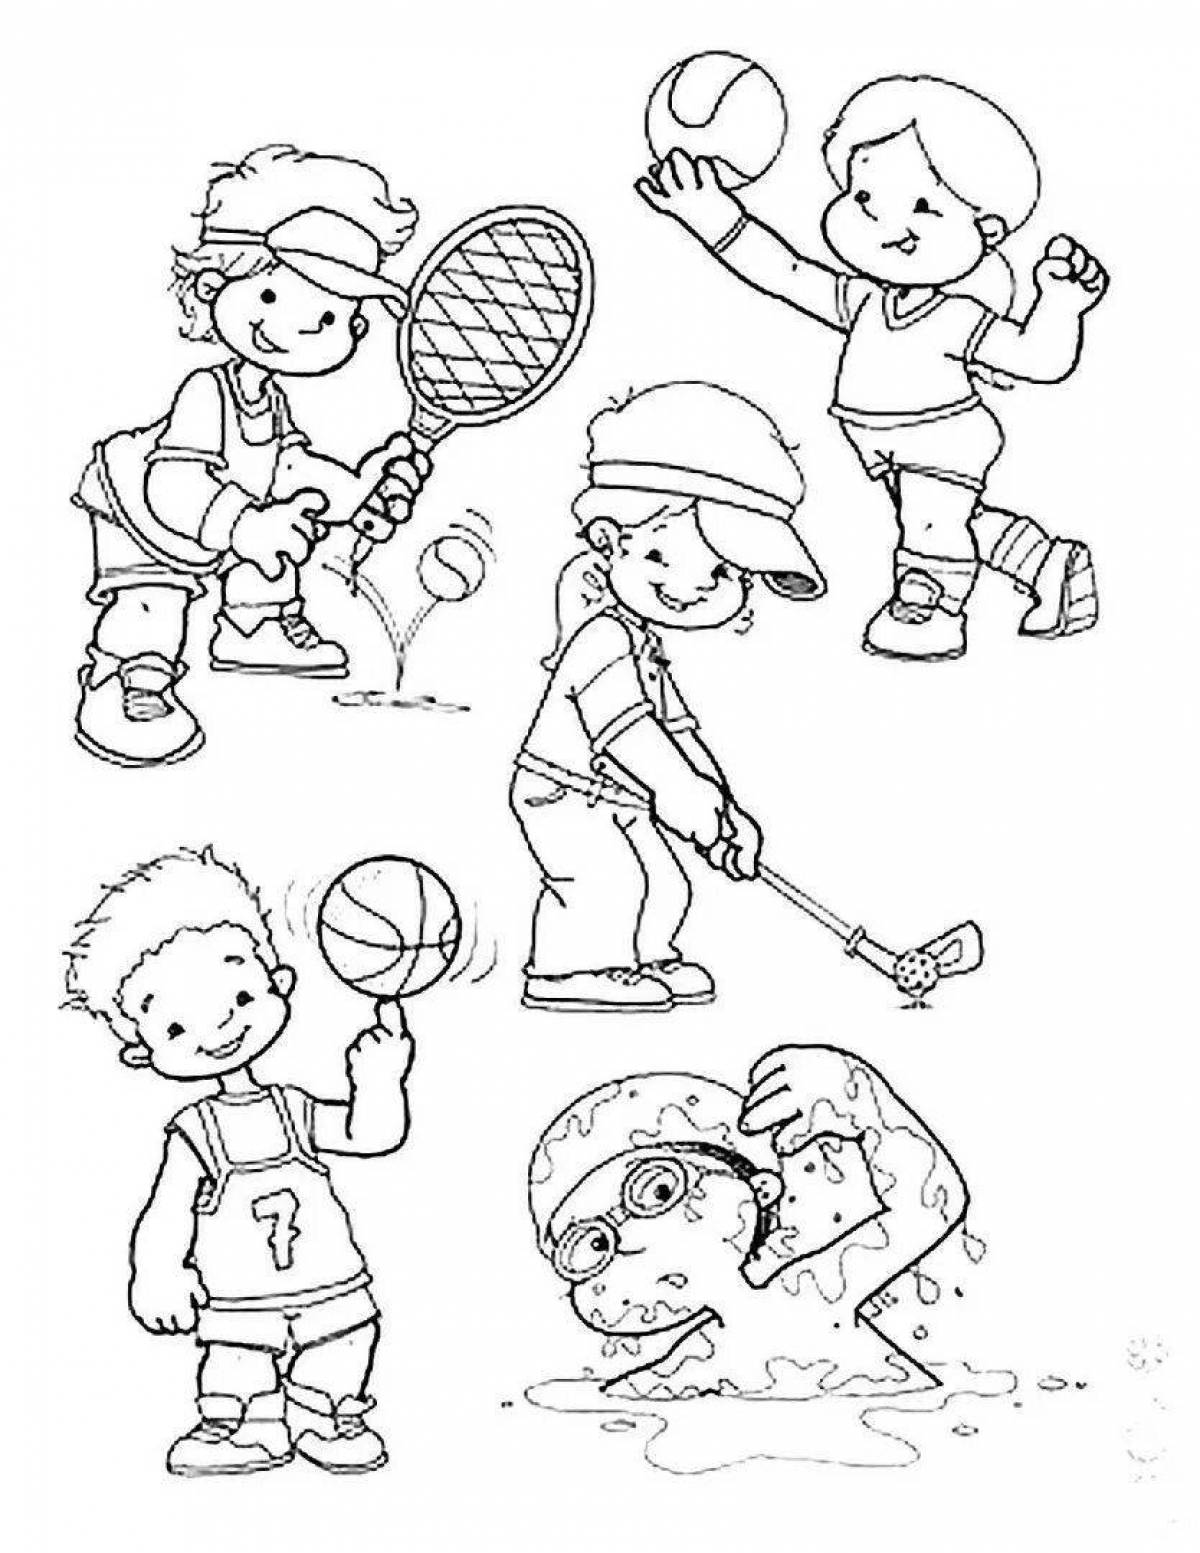 Exciting summer sports coloring book